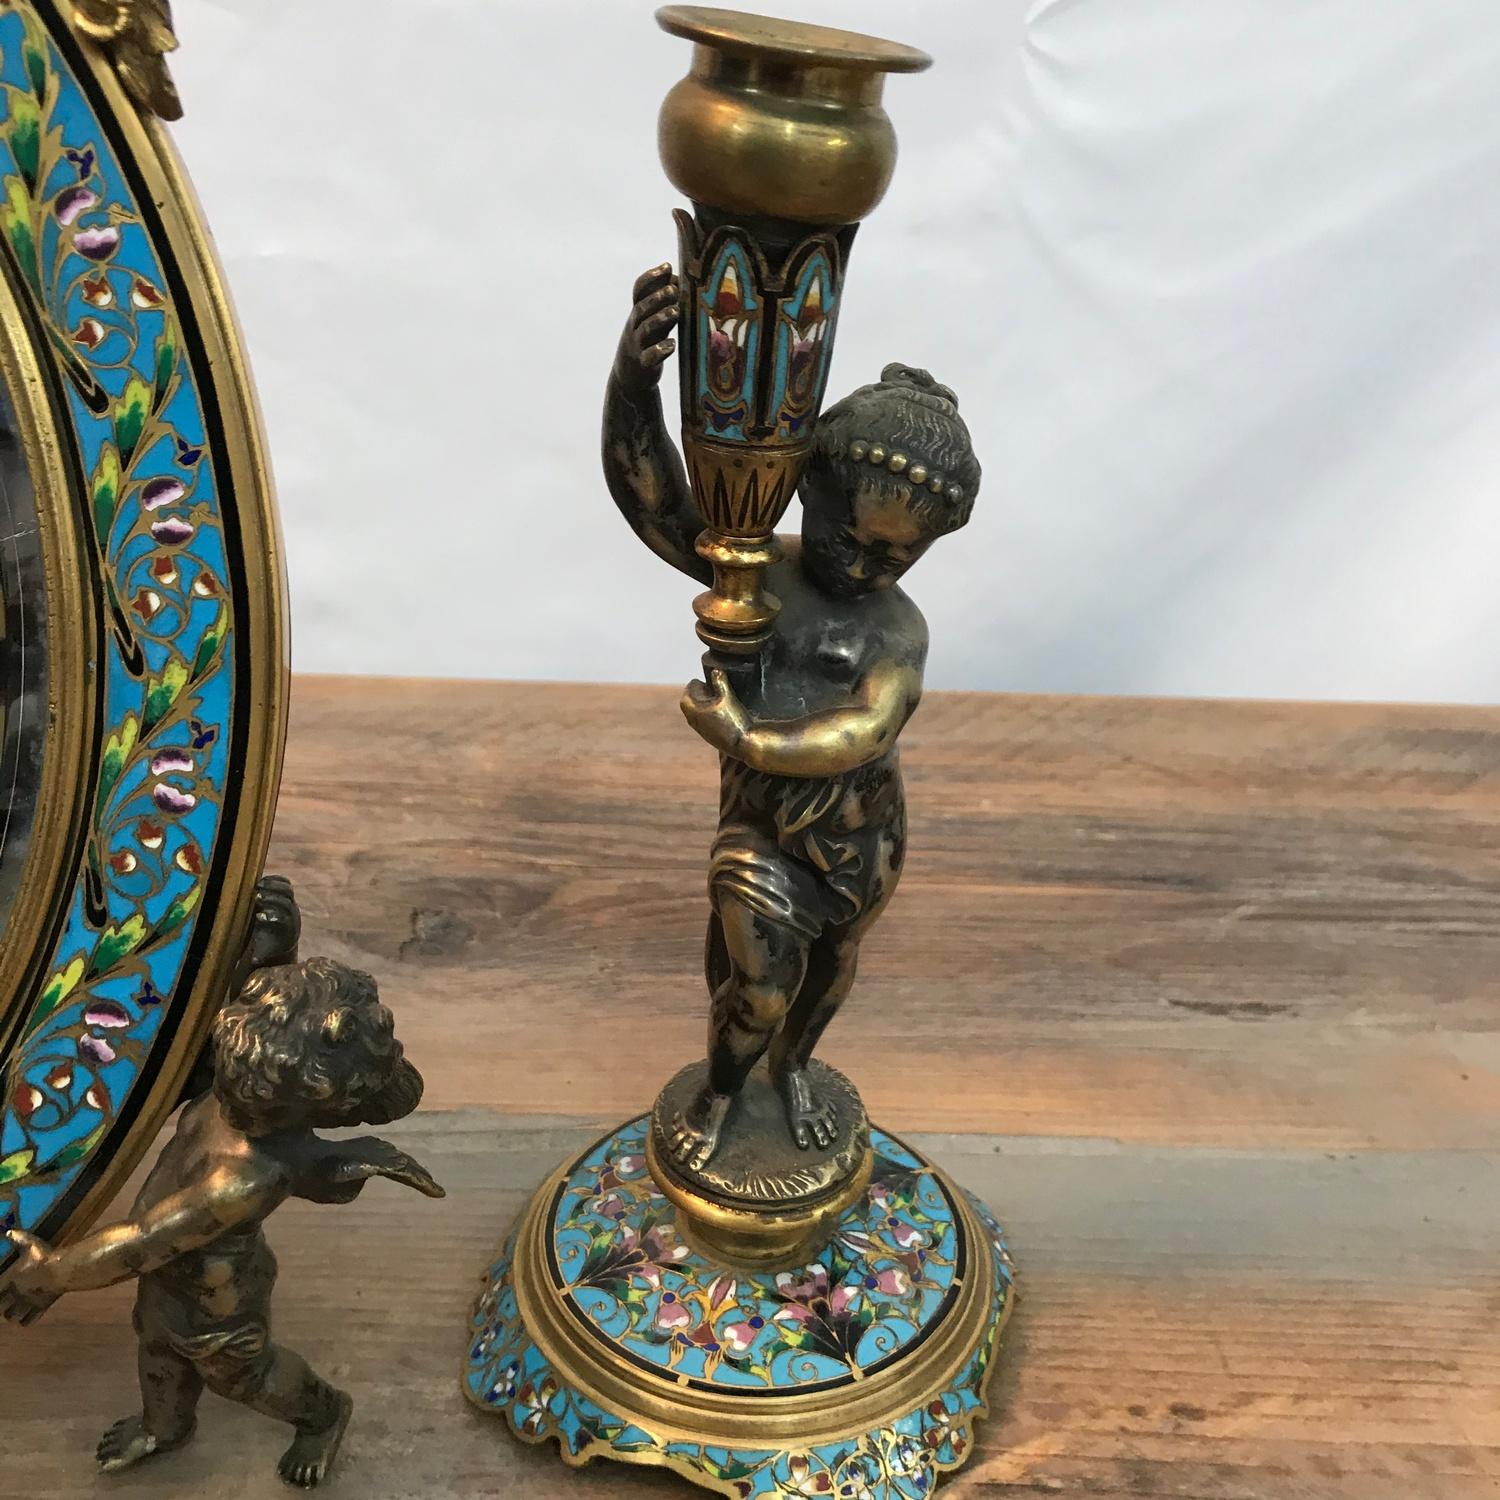 A Victorian French gilt bronze and enamel cloisonne dressing table mirror with matching candle - Image 5 of 8